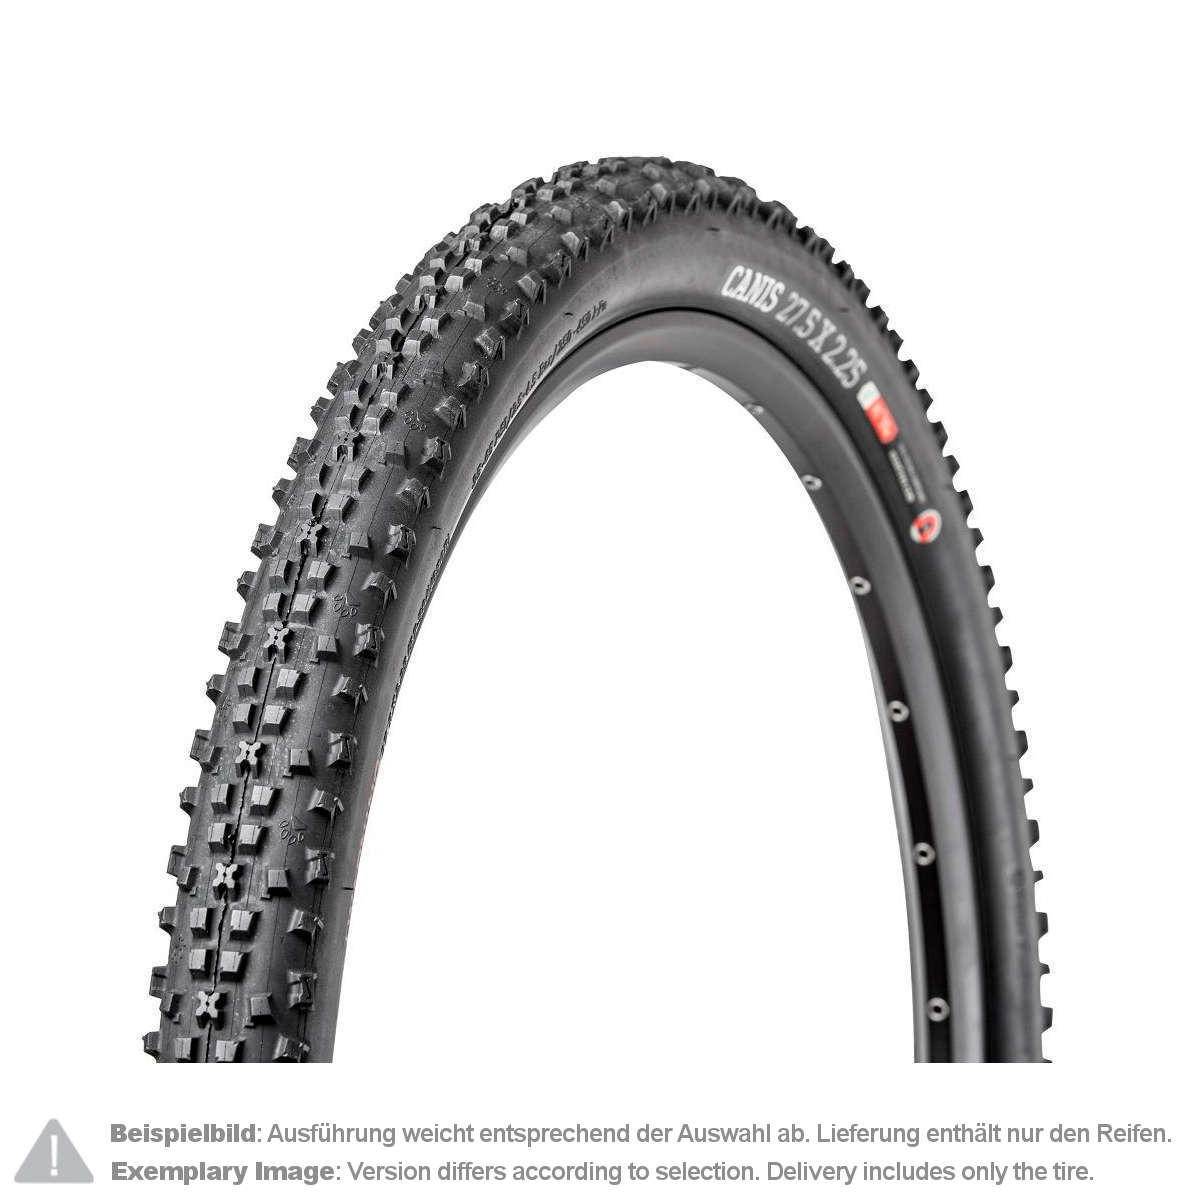 Onza MTB Tire Canis Black, 27.5 x 2.25 Inch, Tubeless Ready, 60 TPI, C3, 65a/55a, Foldable